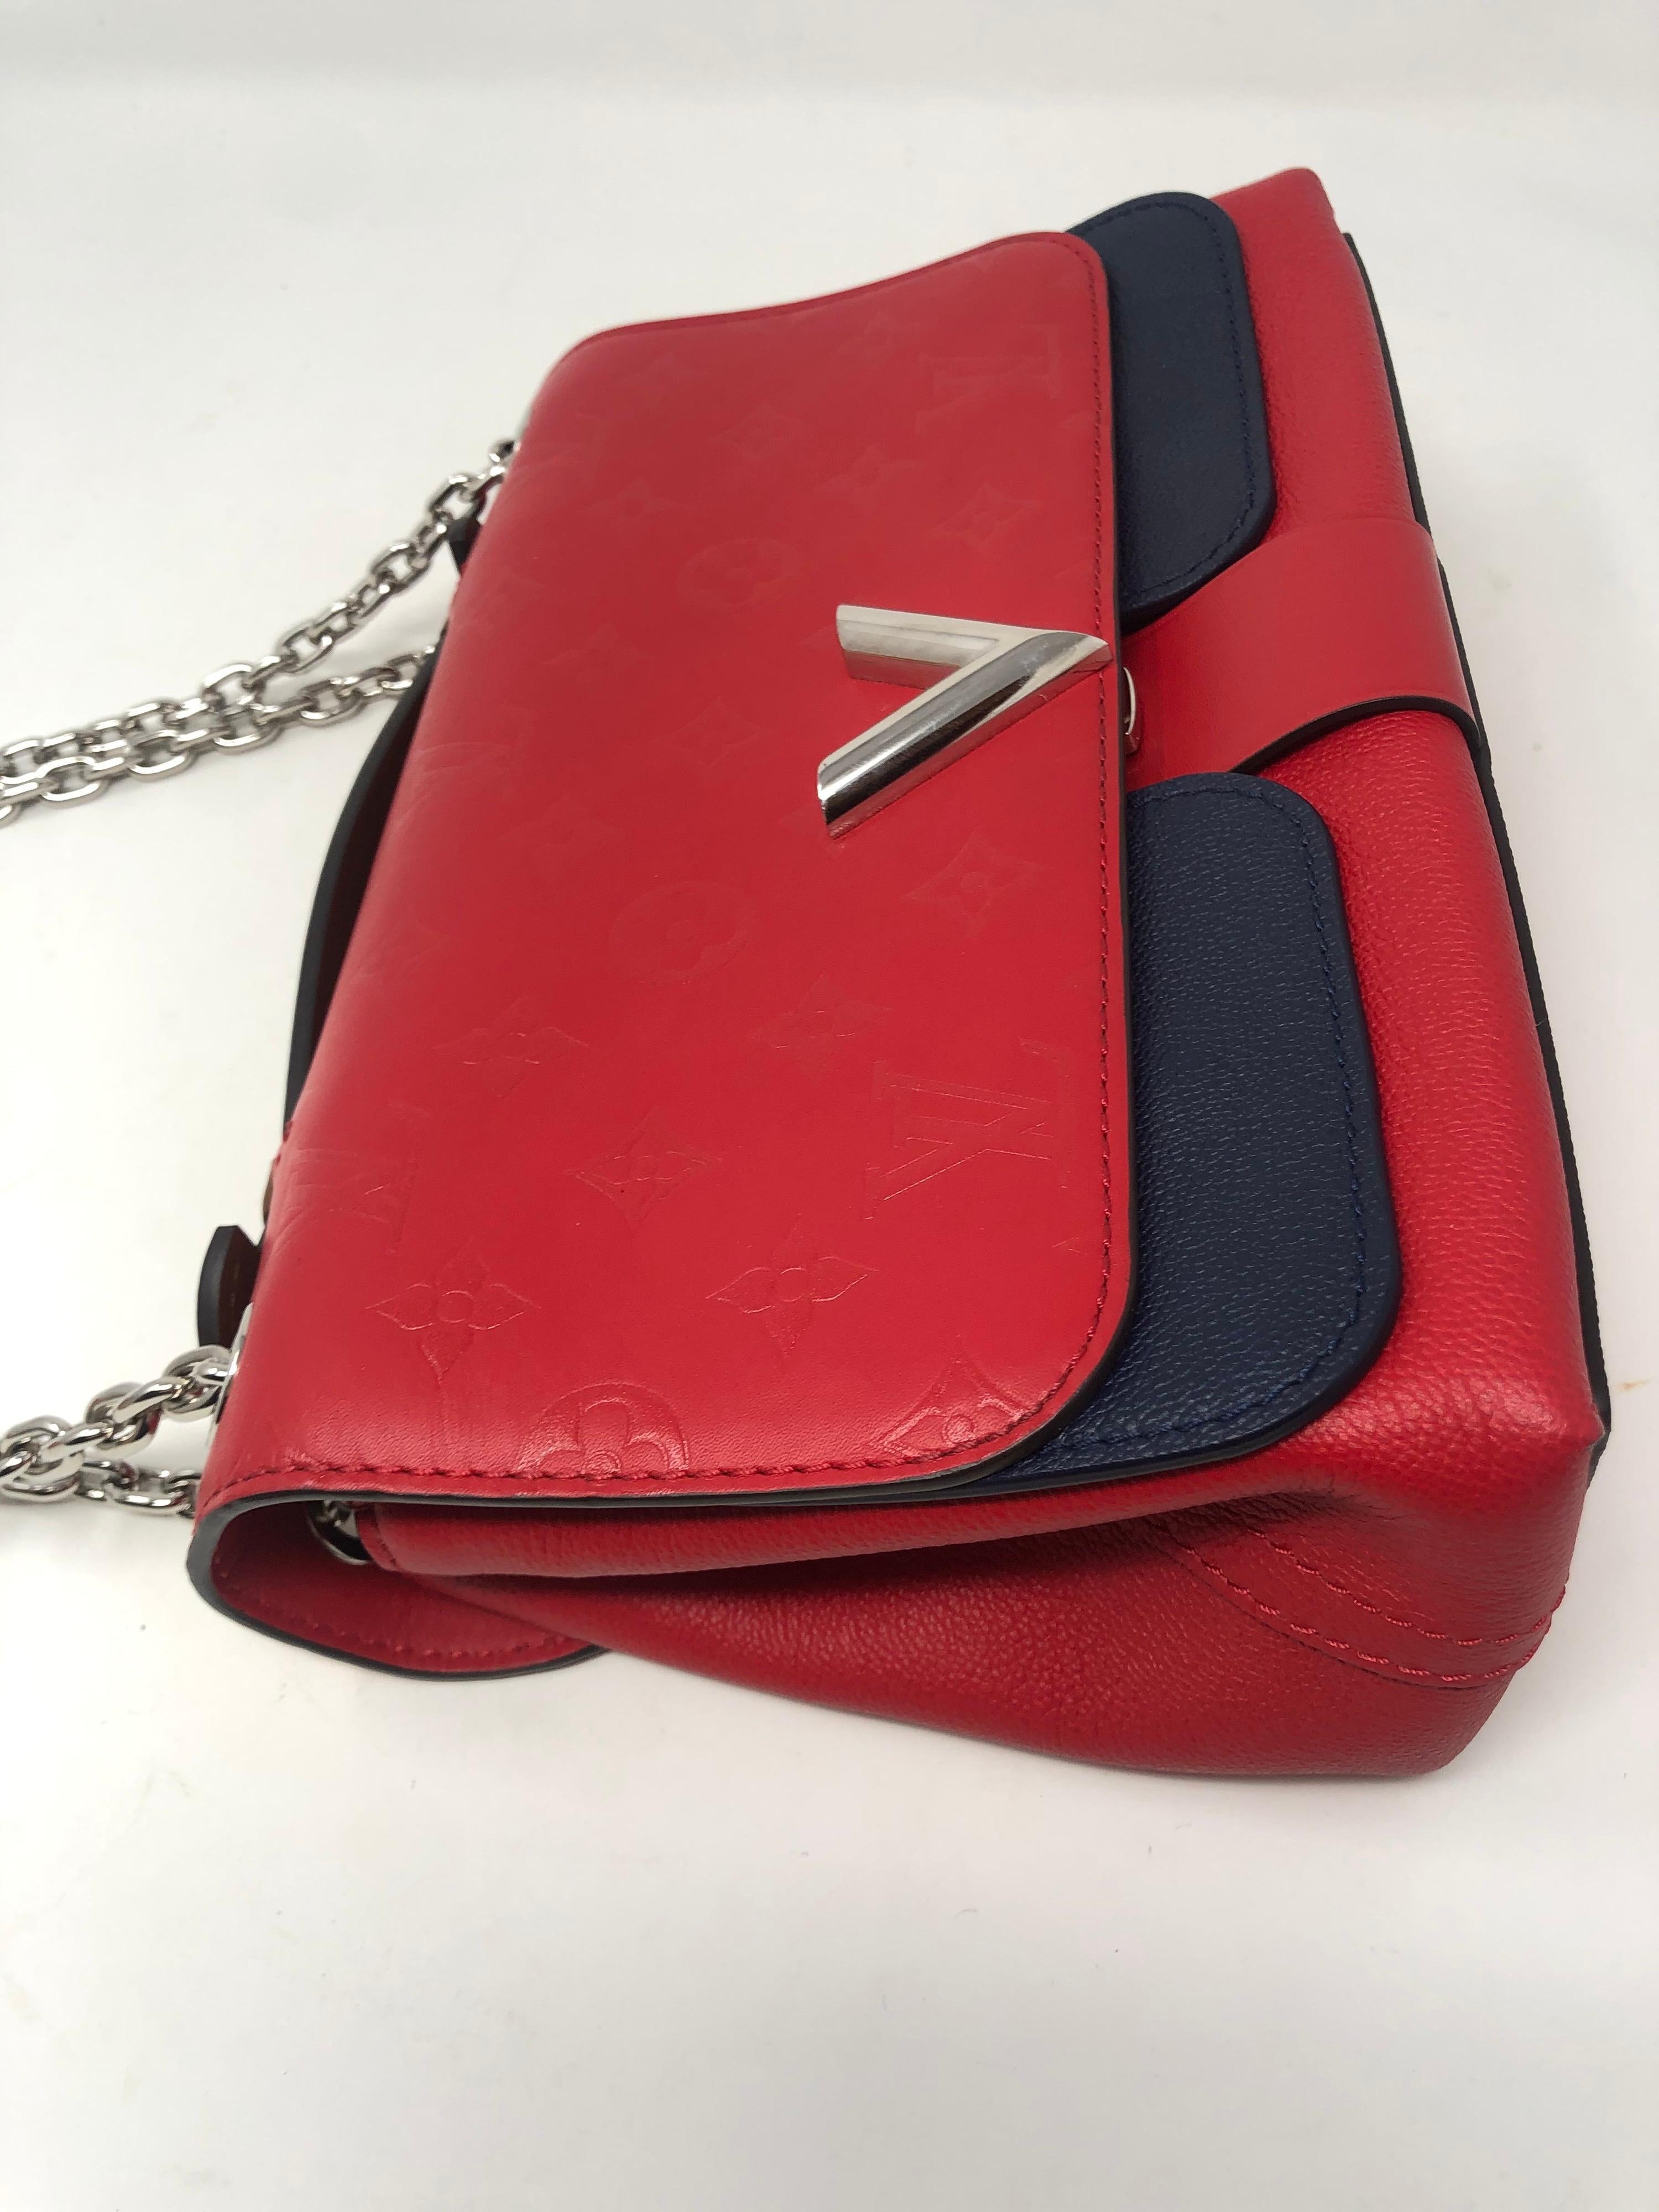 Louis Vuitton Limited Edition Red and Navy Crossbody Bag 8